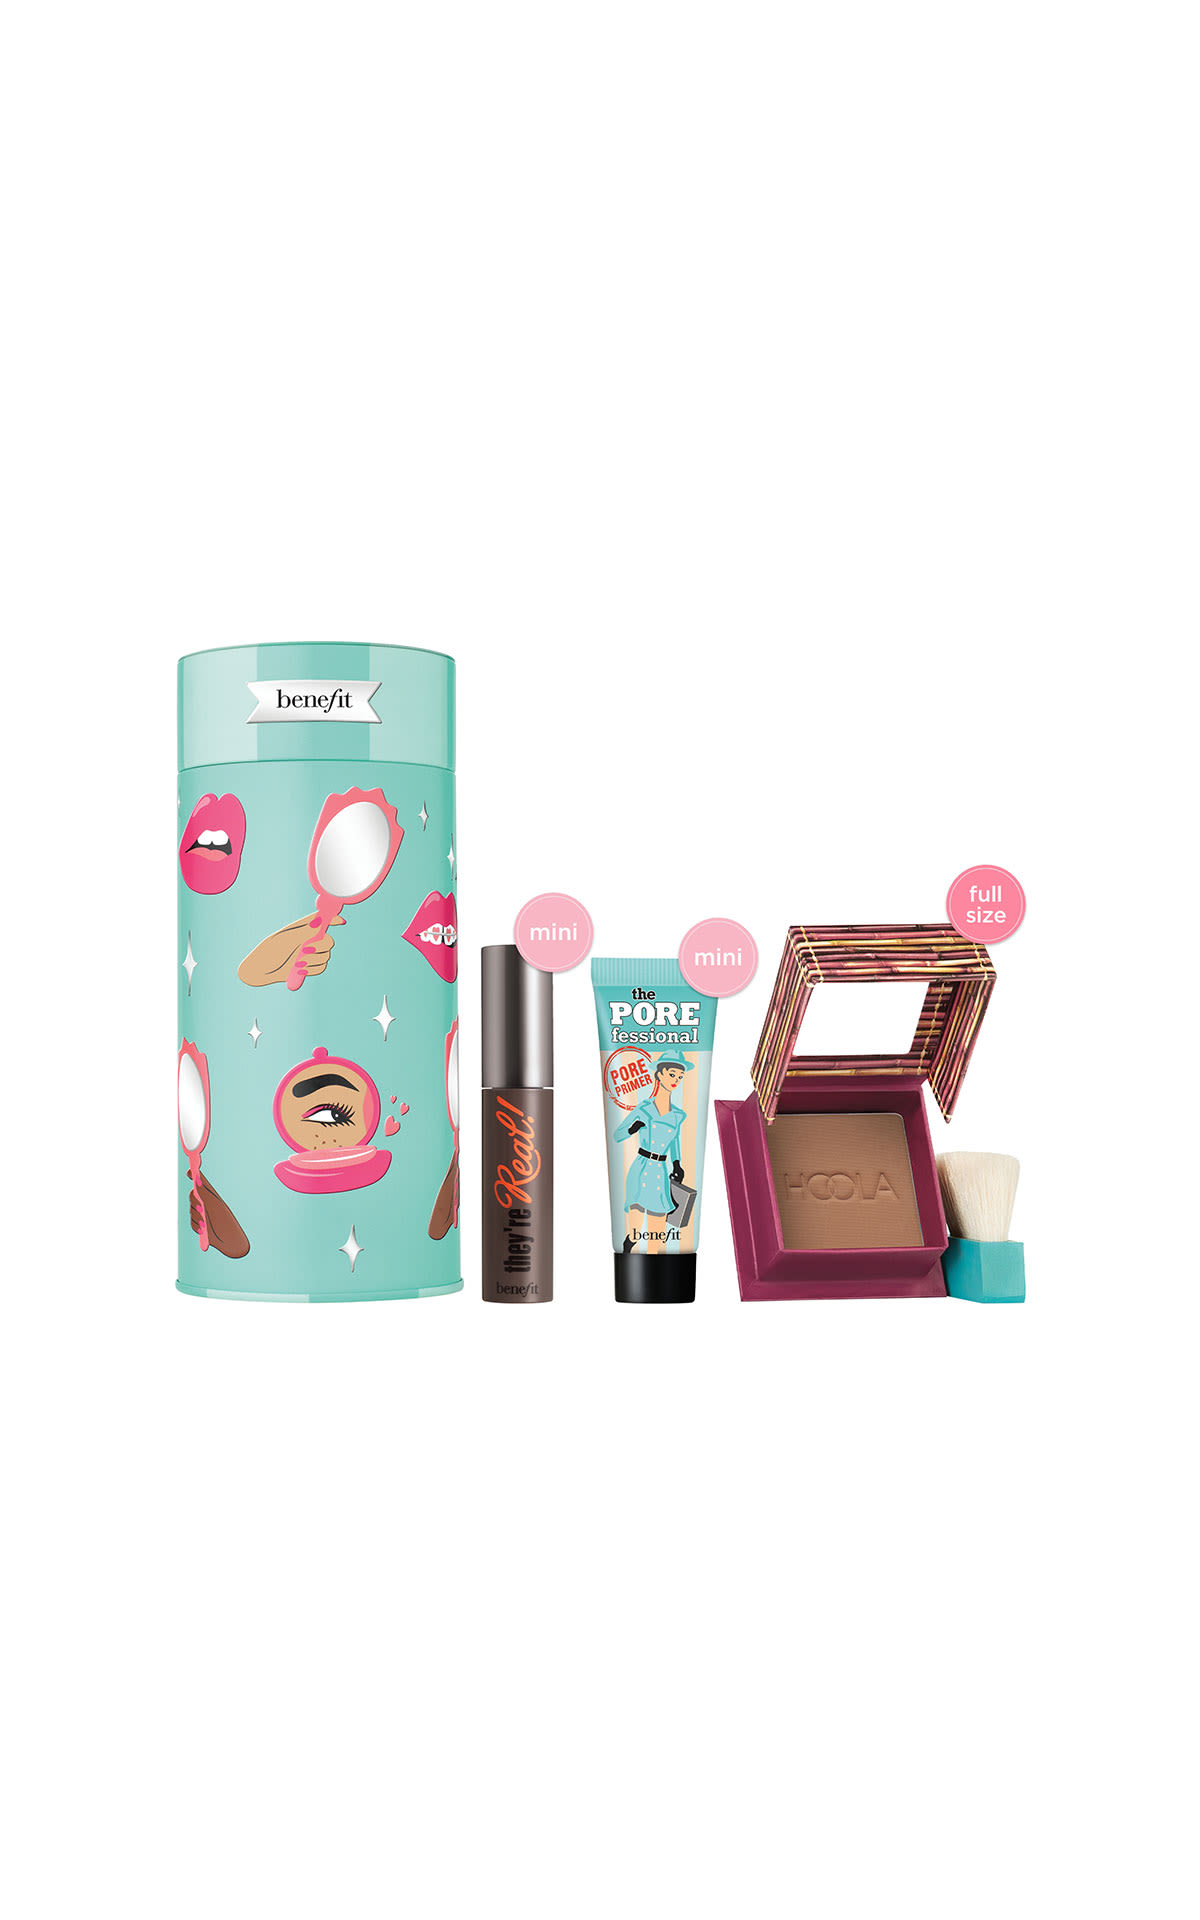 Benefit Cosmetics Party hopper from Bicester Village